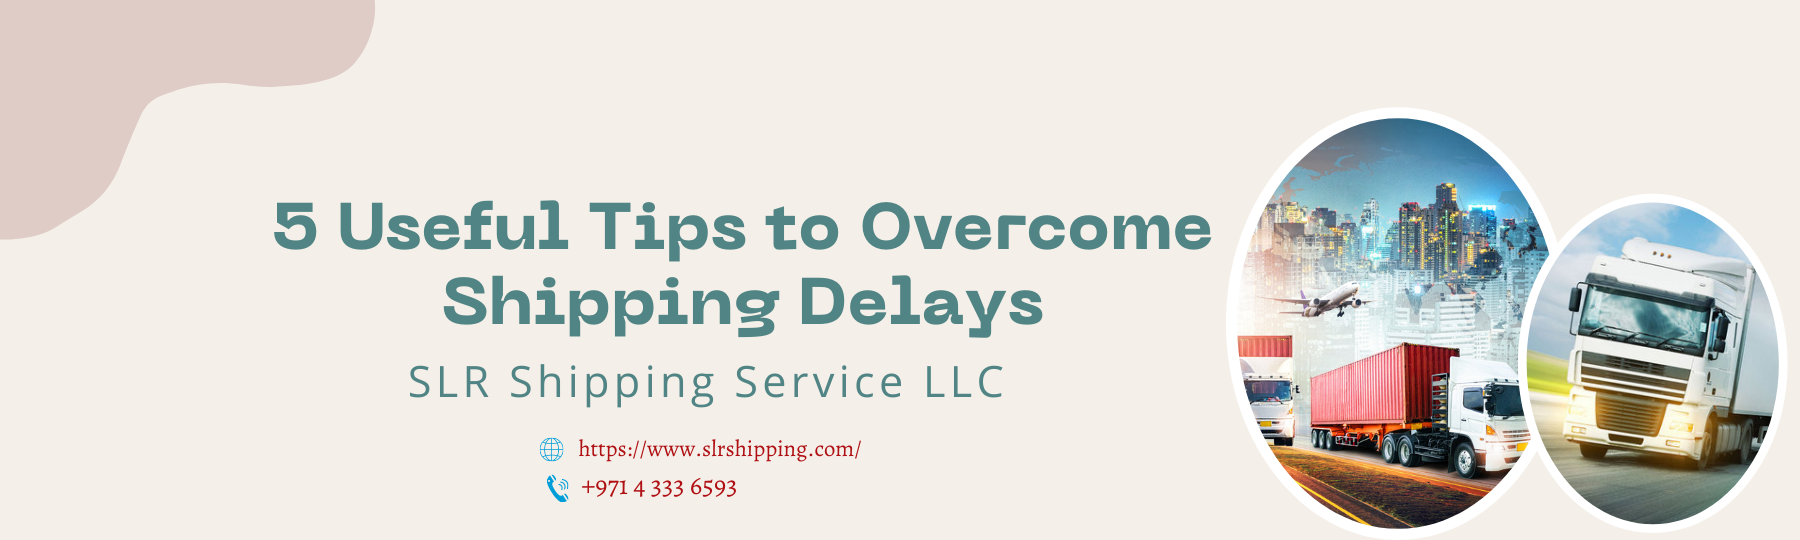 5 Useful Tips to Overcome Shipping Delays